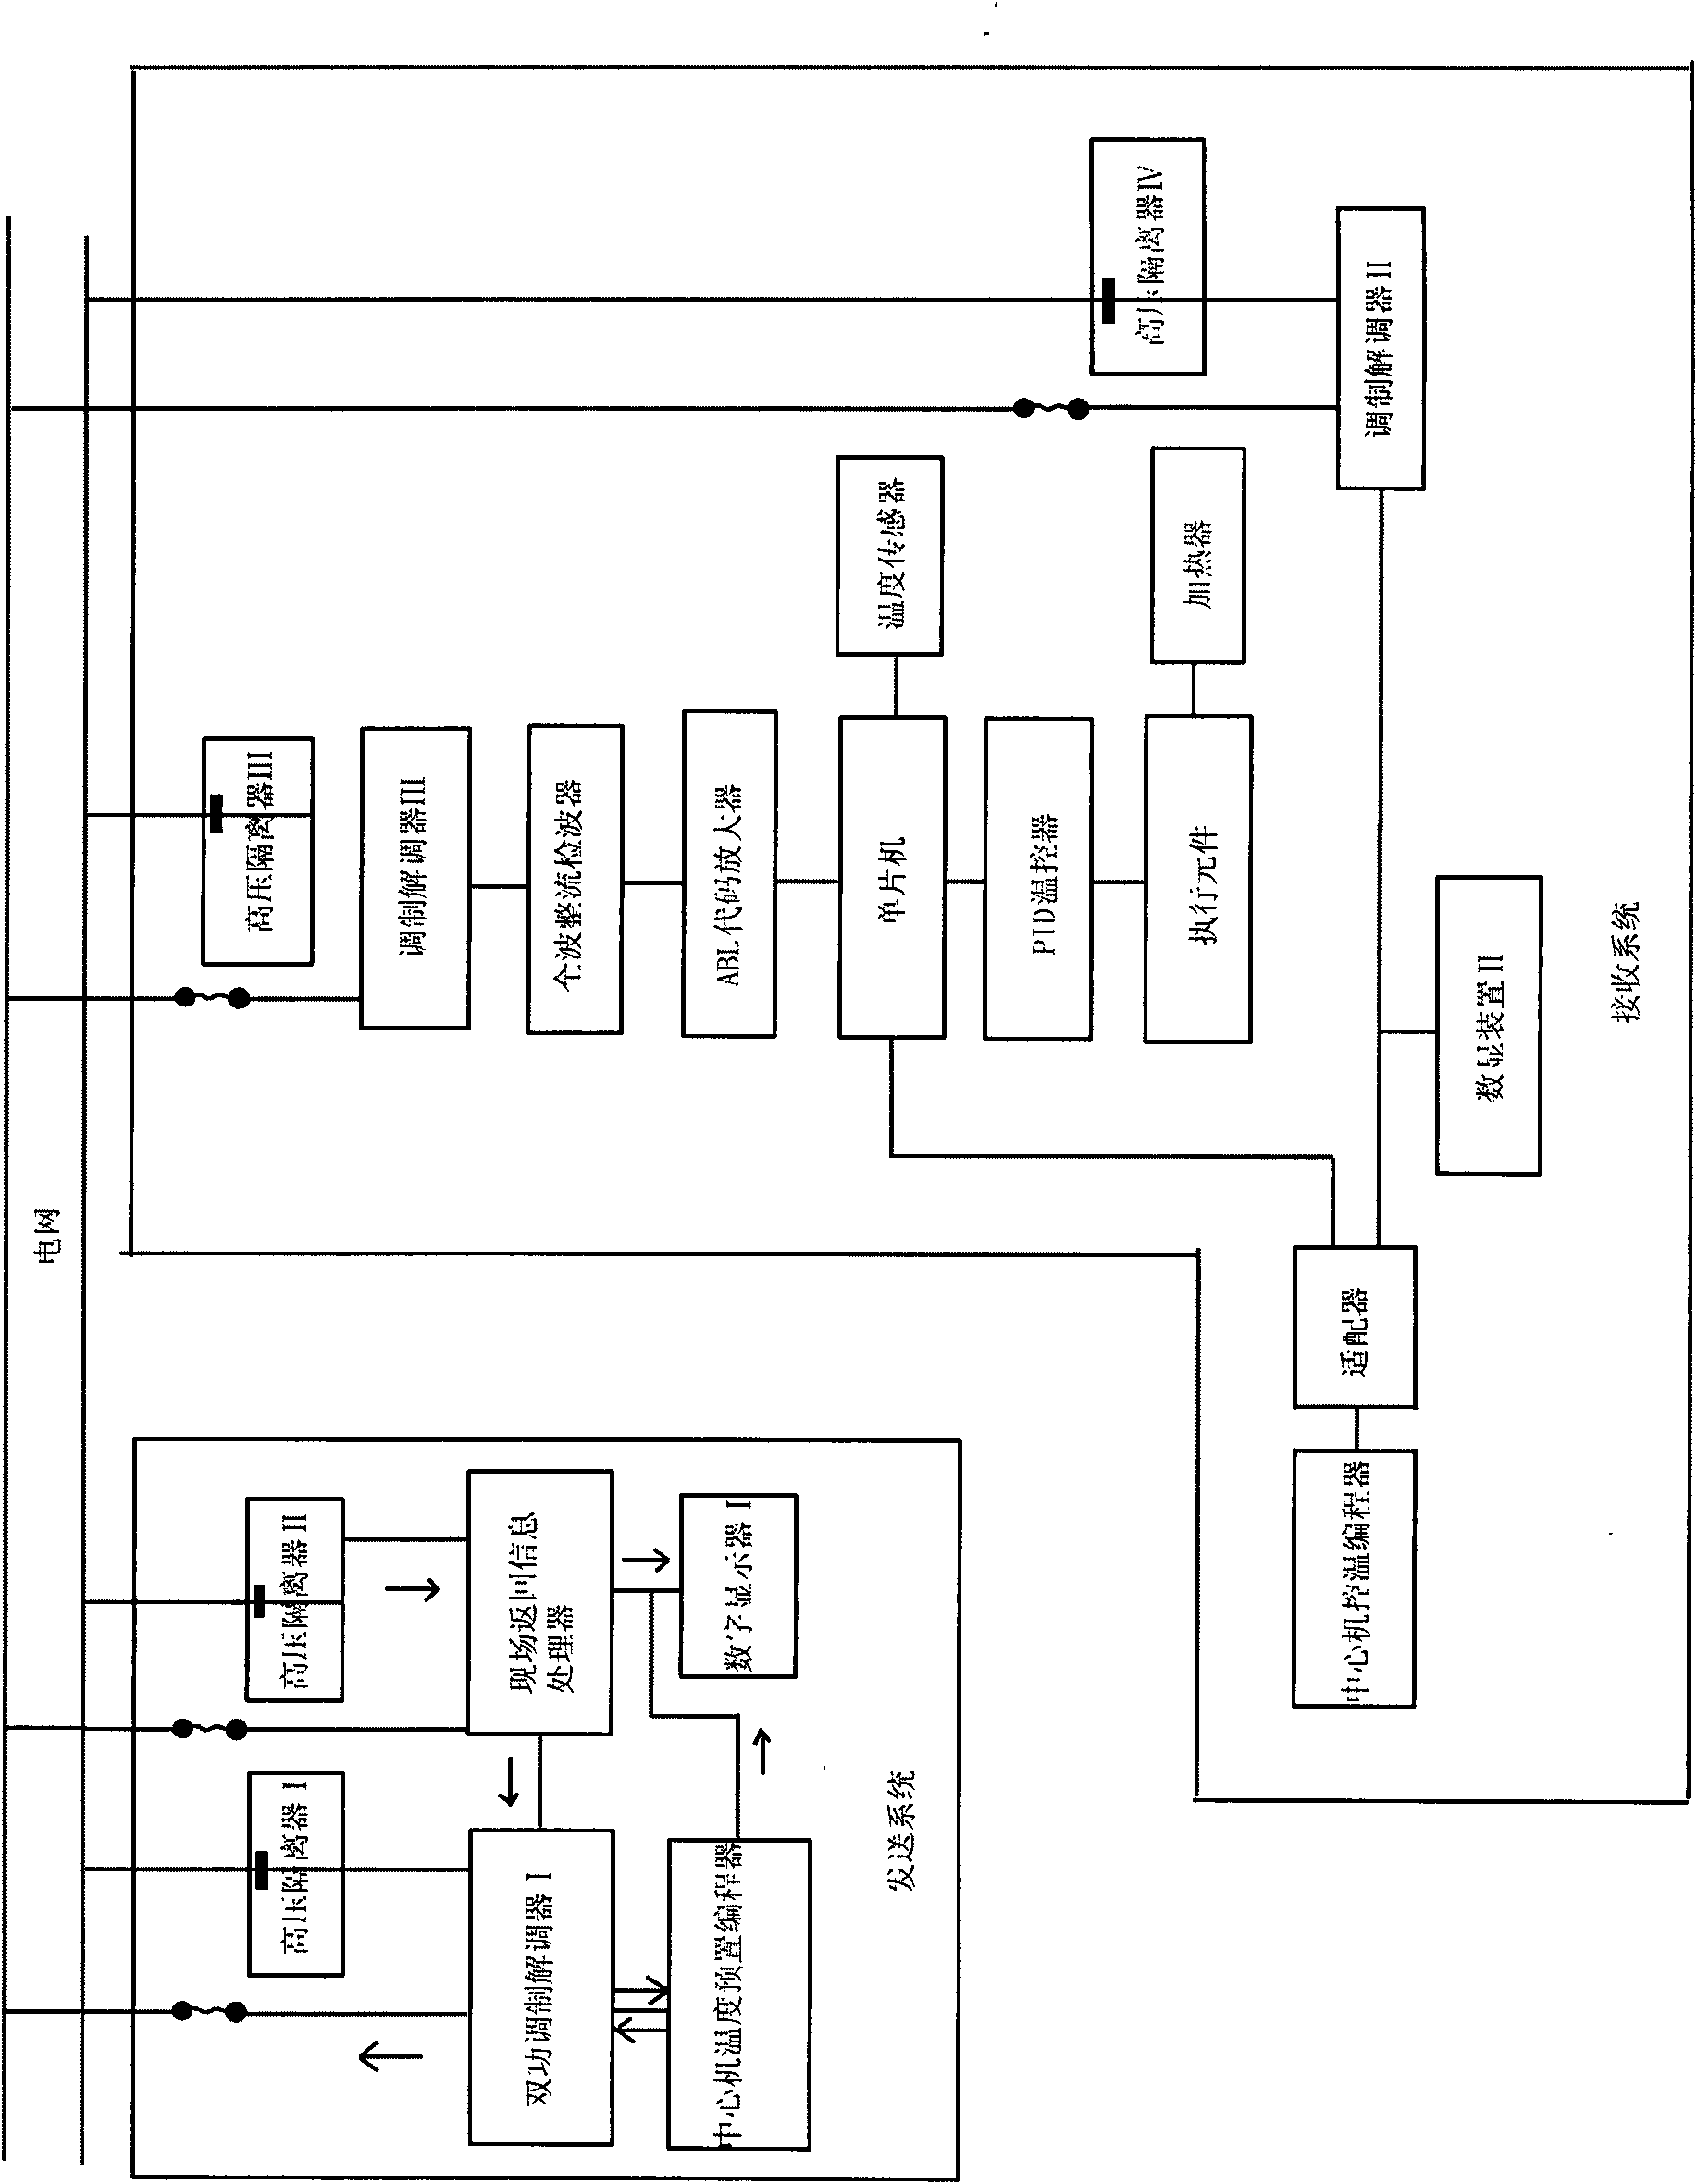 Remote temperature controller for transmitting computer temperature control information by using power line carrier